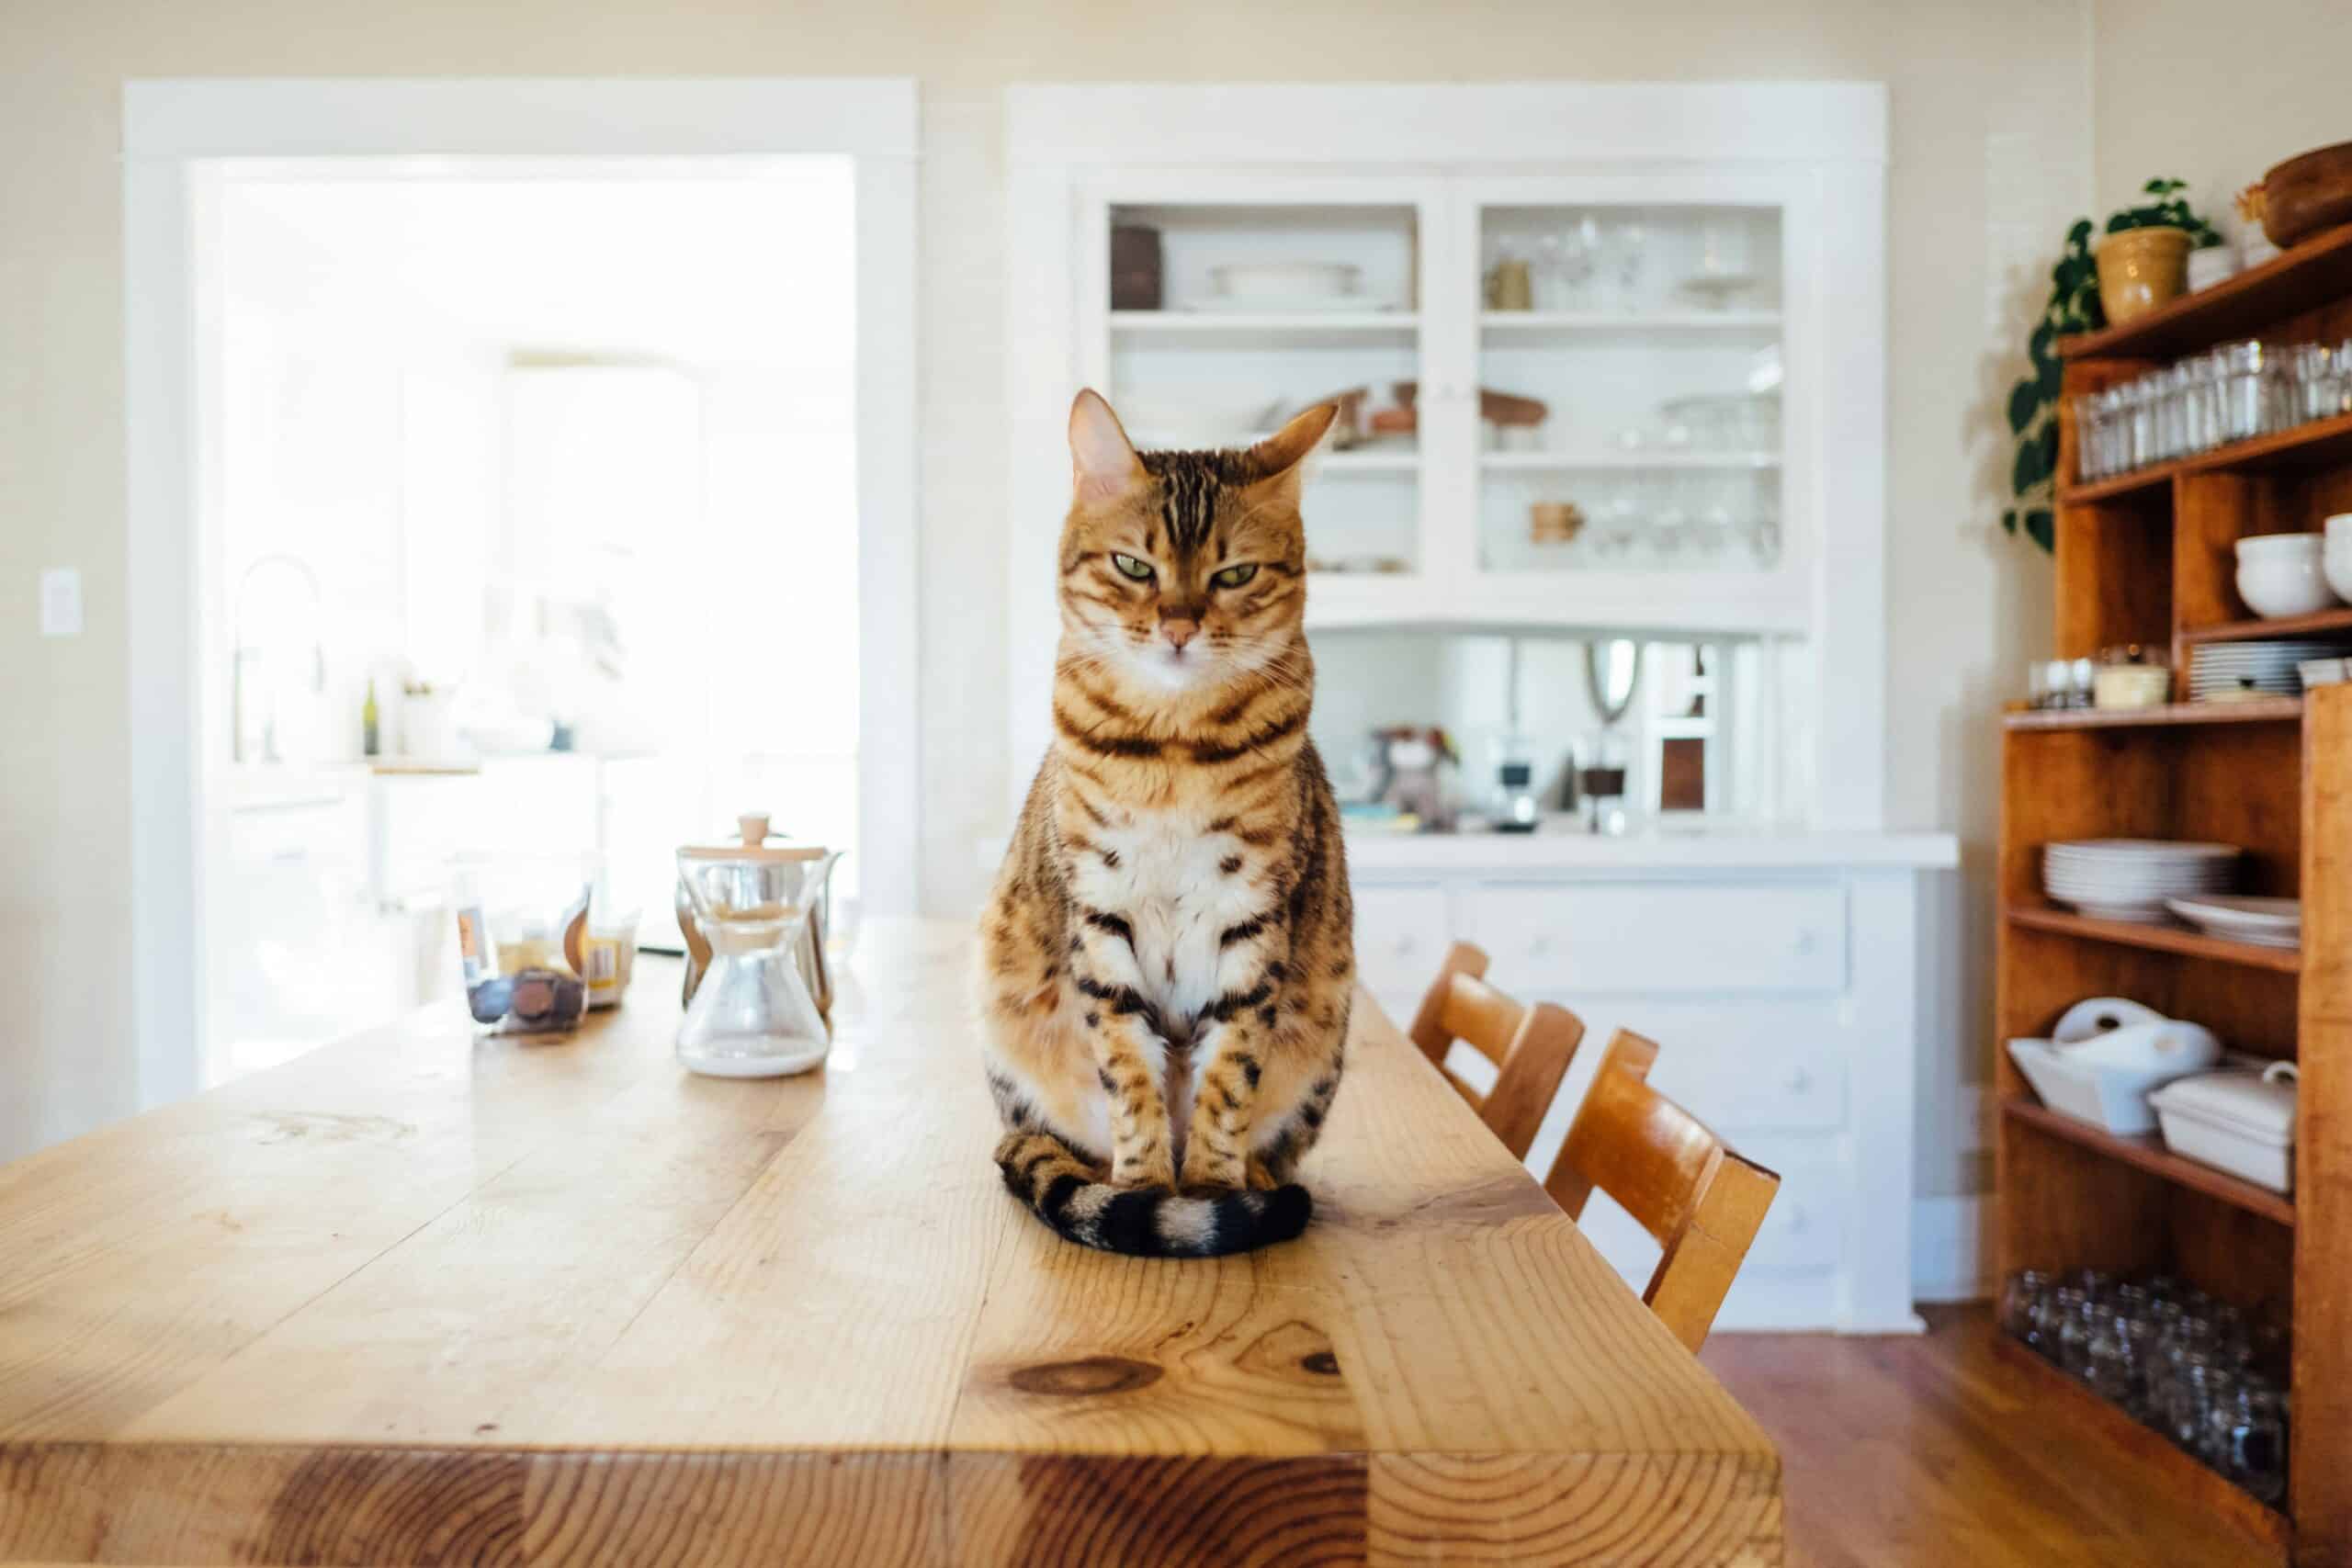 Cat sitting on dining table